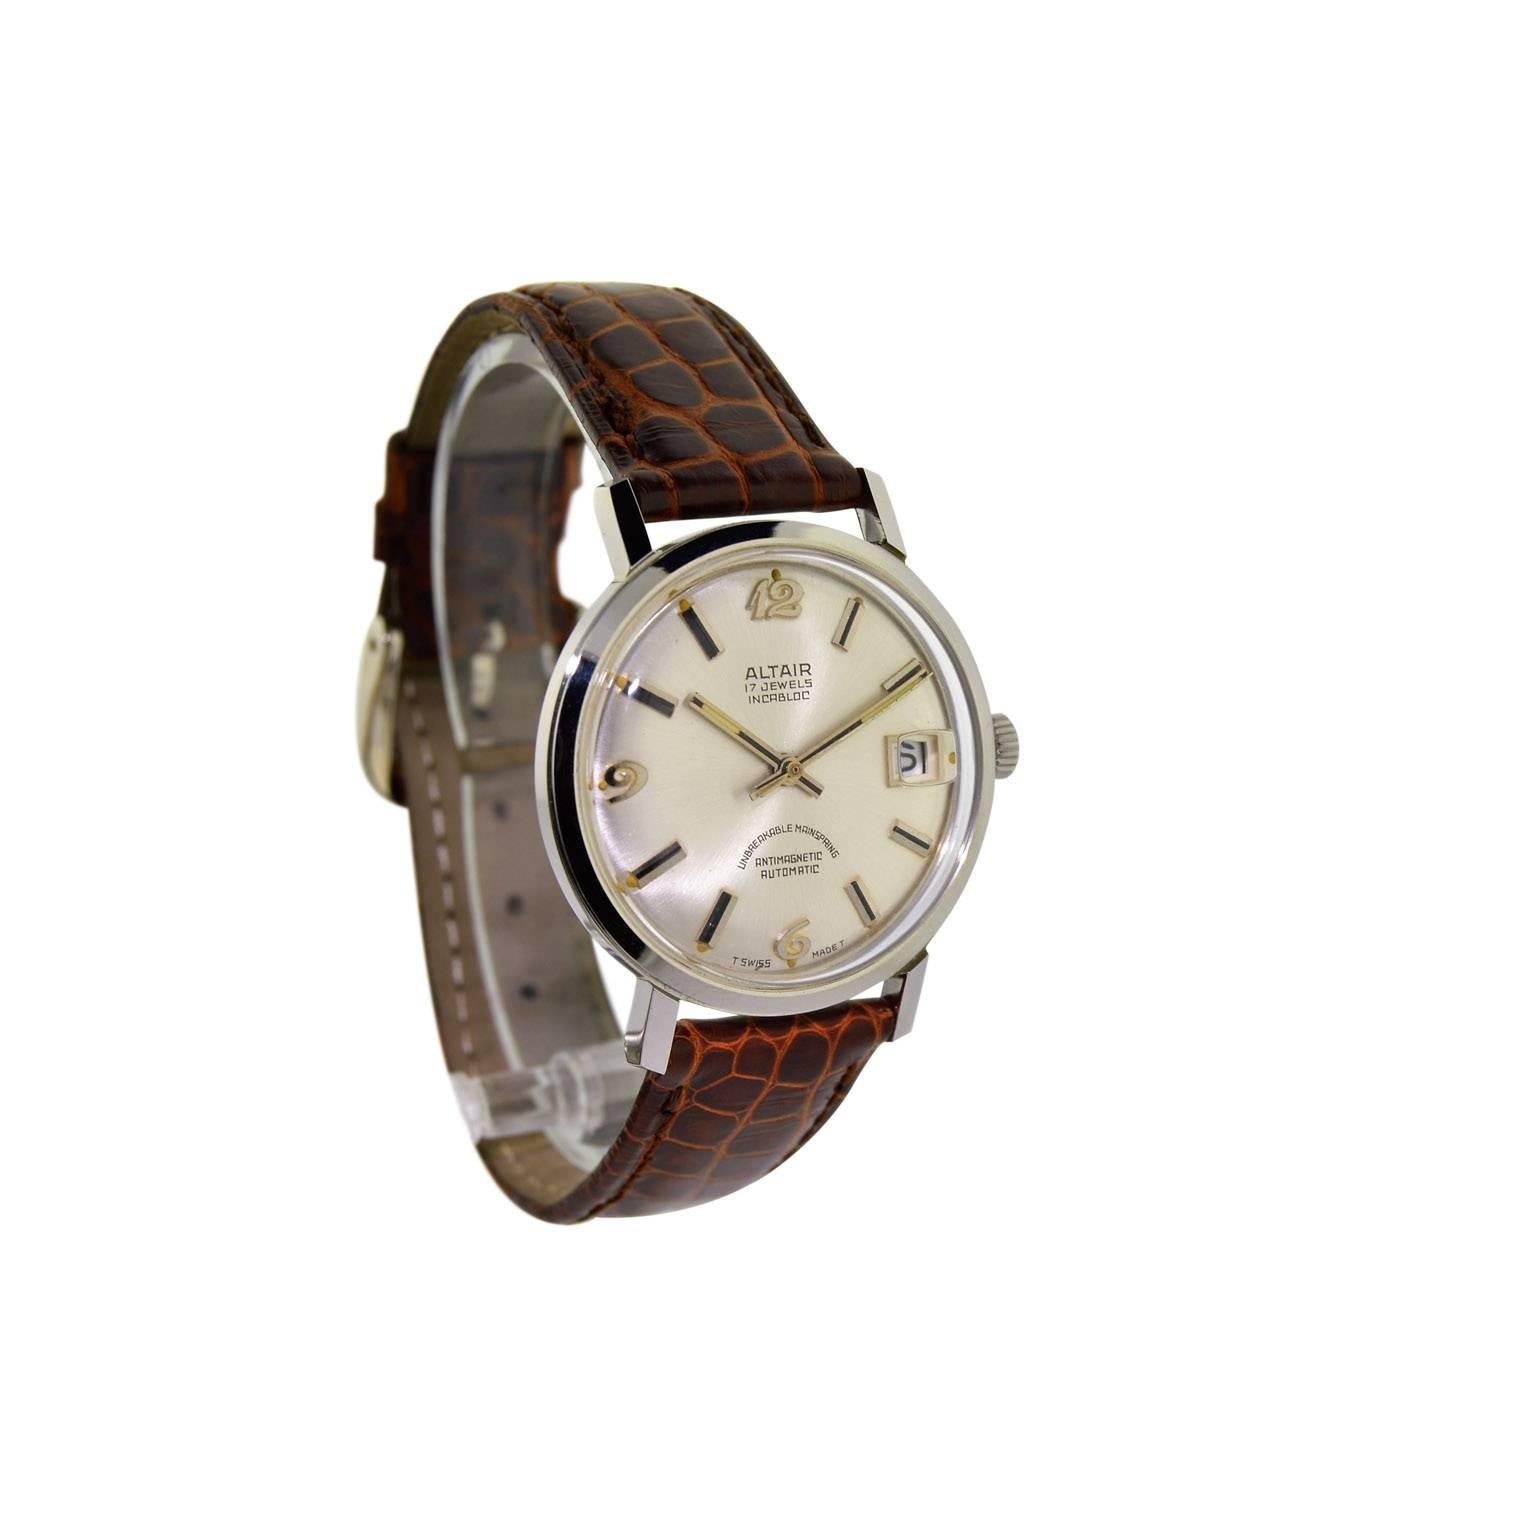 FACTORY / HOUSE: Altair Watch Company
STYLE / REFERENCE: Classic Round 
METAL / MATERIAL: Steel 
CIRCA: 1950's / 1960's
DIMENSIONS: 41mm X 34mm
MOVEMENT / CALIBER: Automatic Winding / 17 Jewels 
DIAL / HANDS: Original Silvered with Baton Markers /